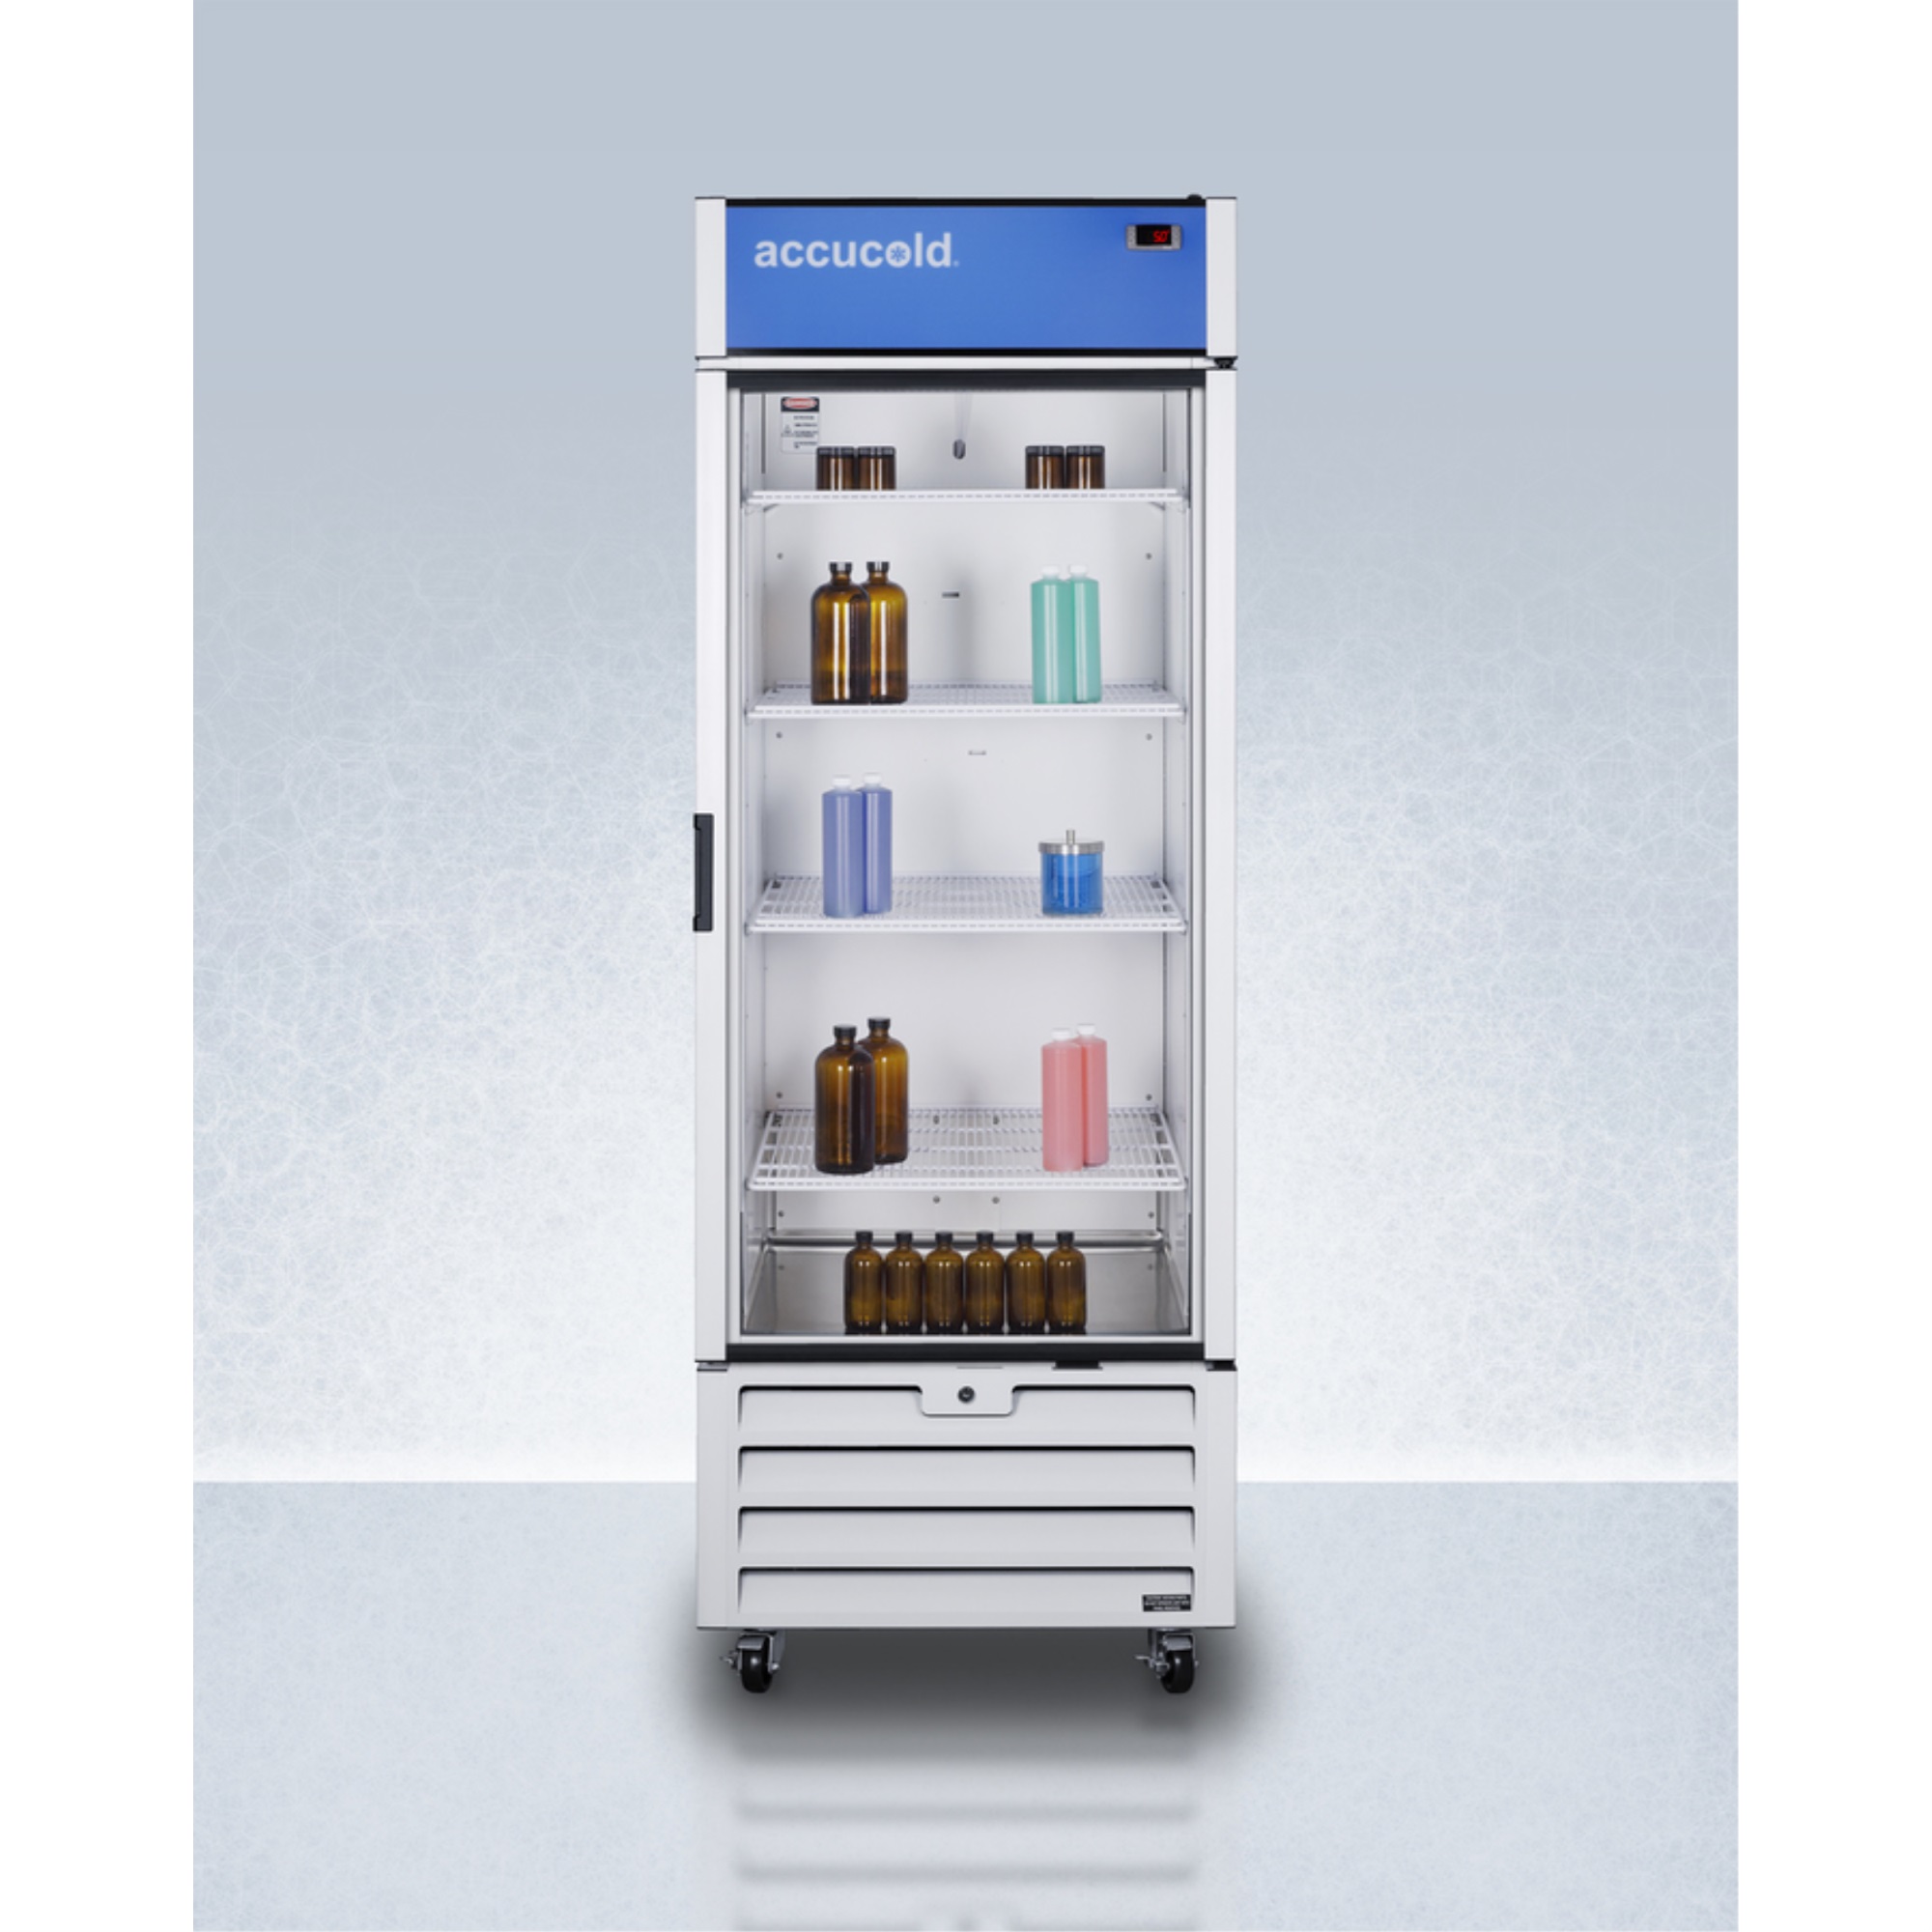 AccuCold Comercial display refrigerator, full size